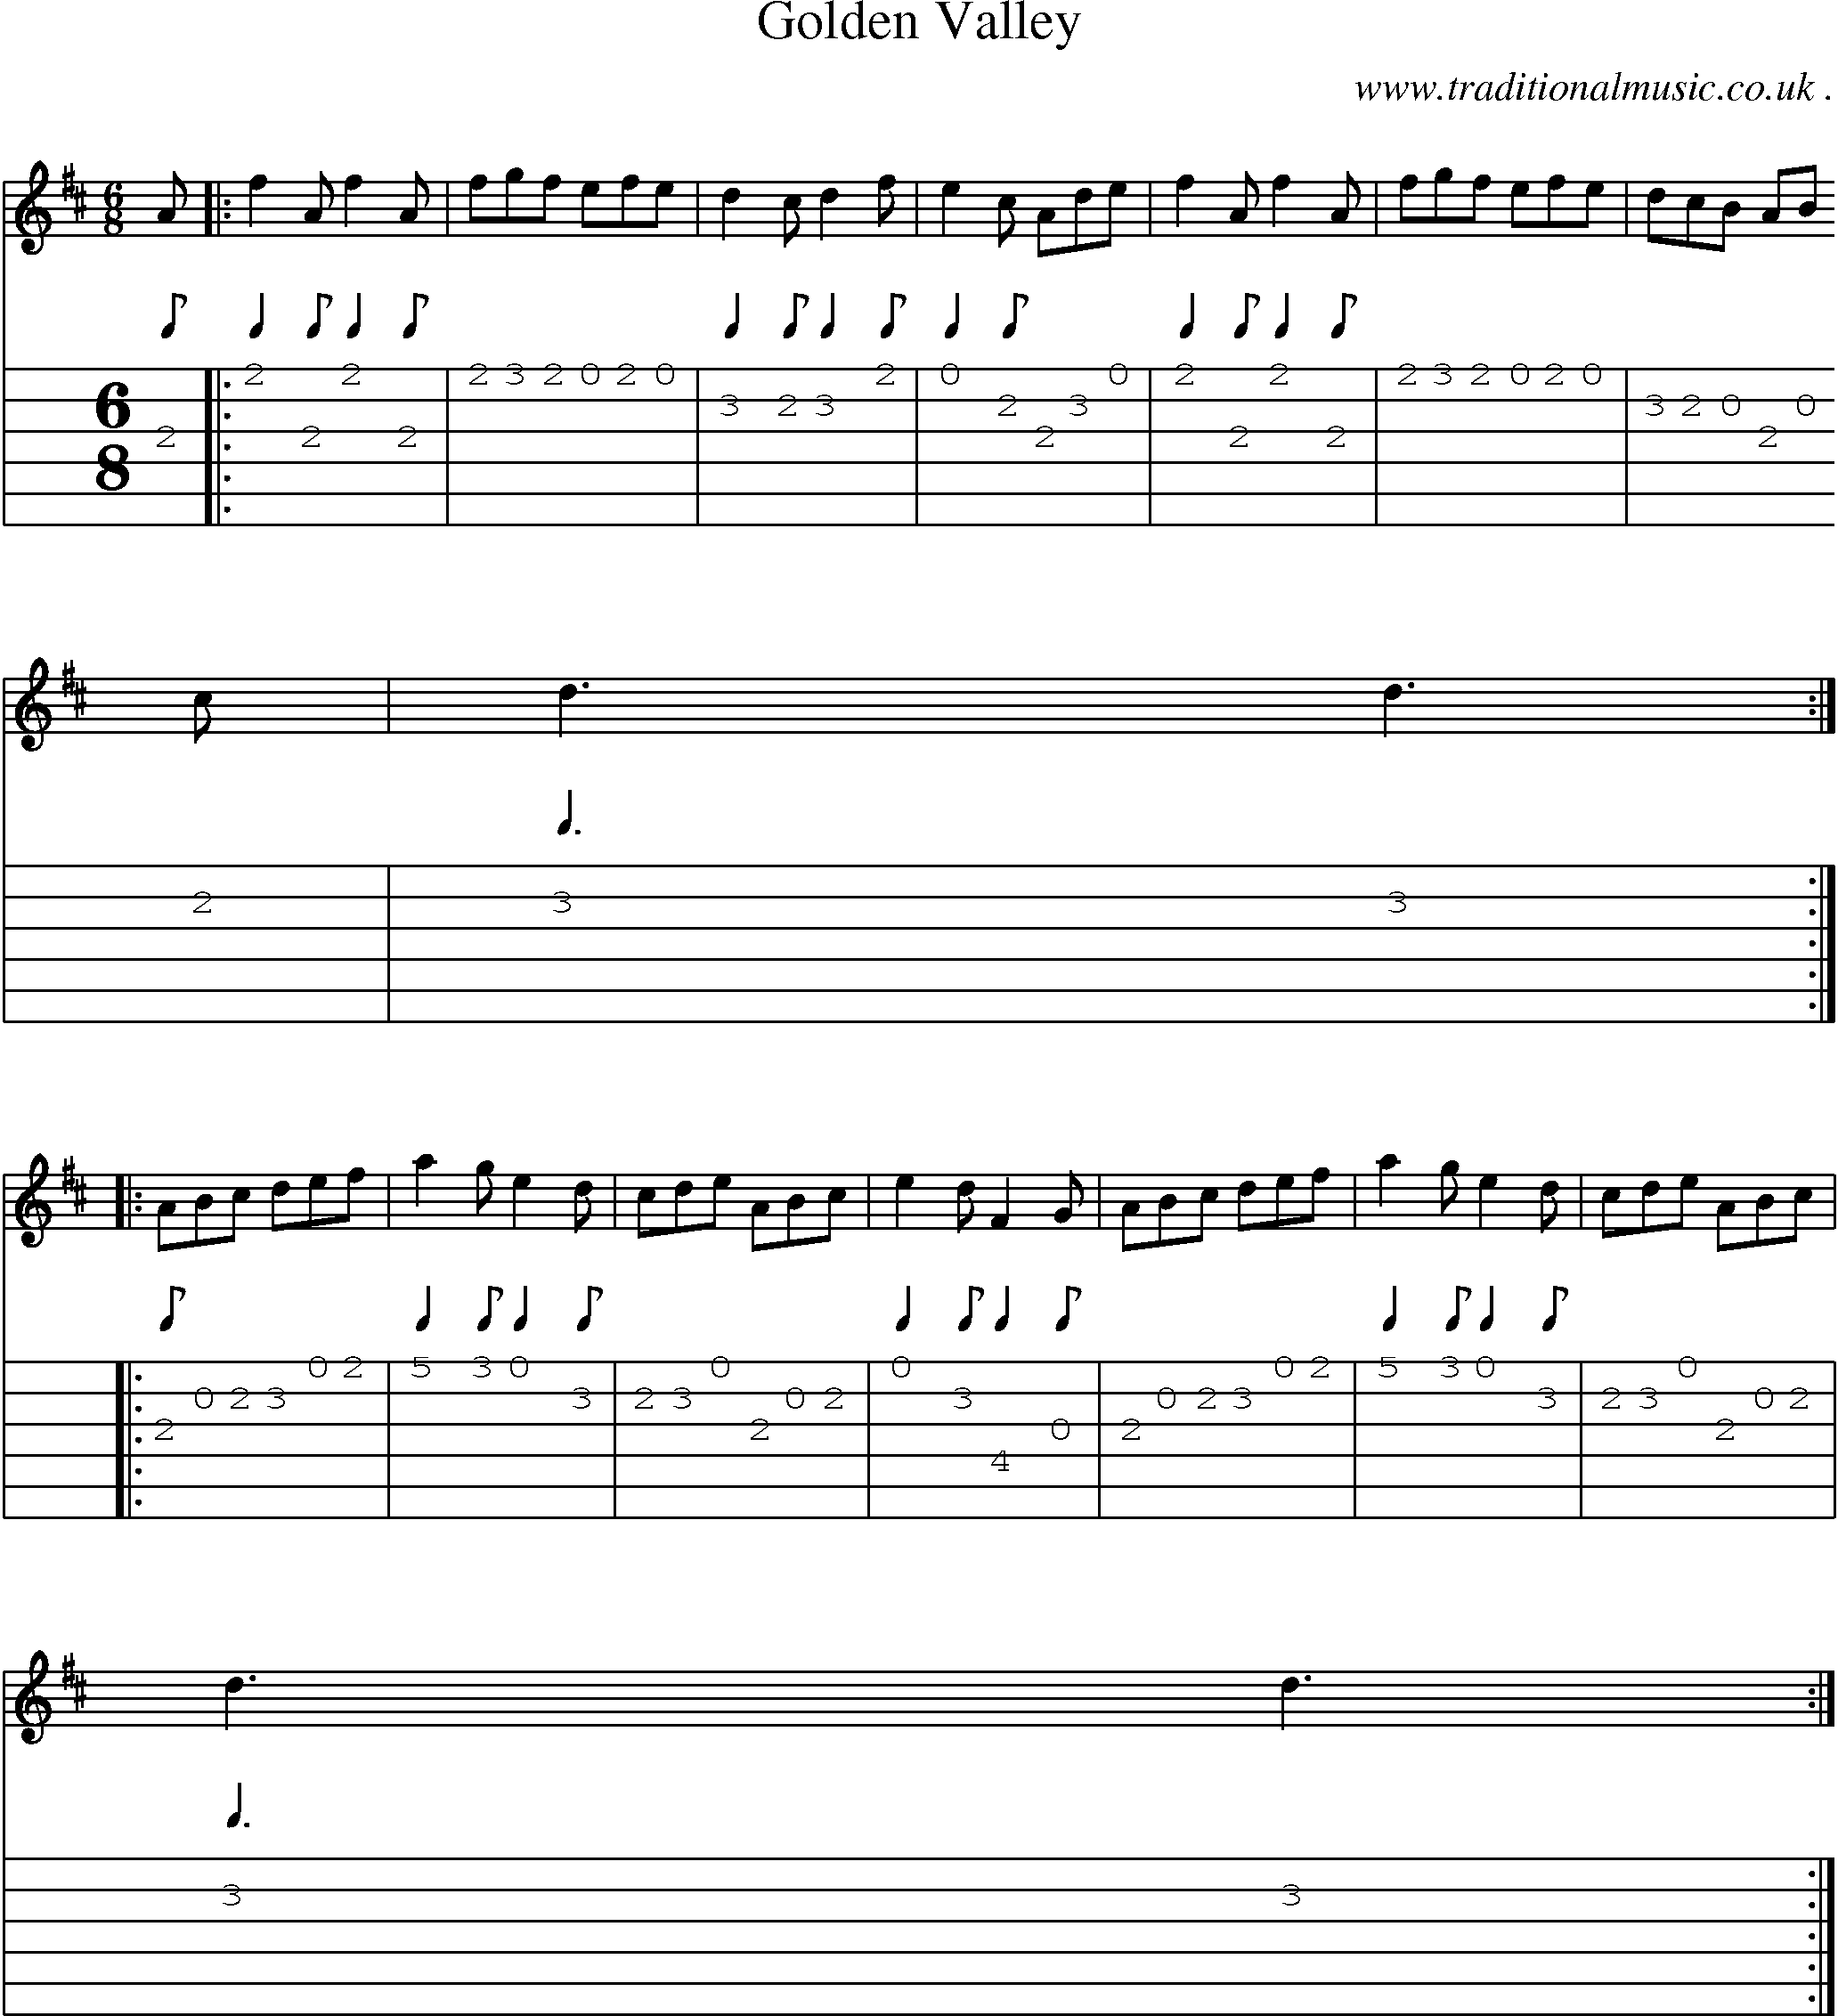 Sheet-Music and Guitar Tabs for Golden Valley